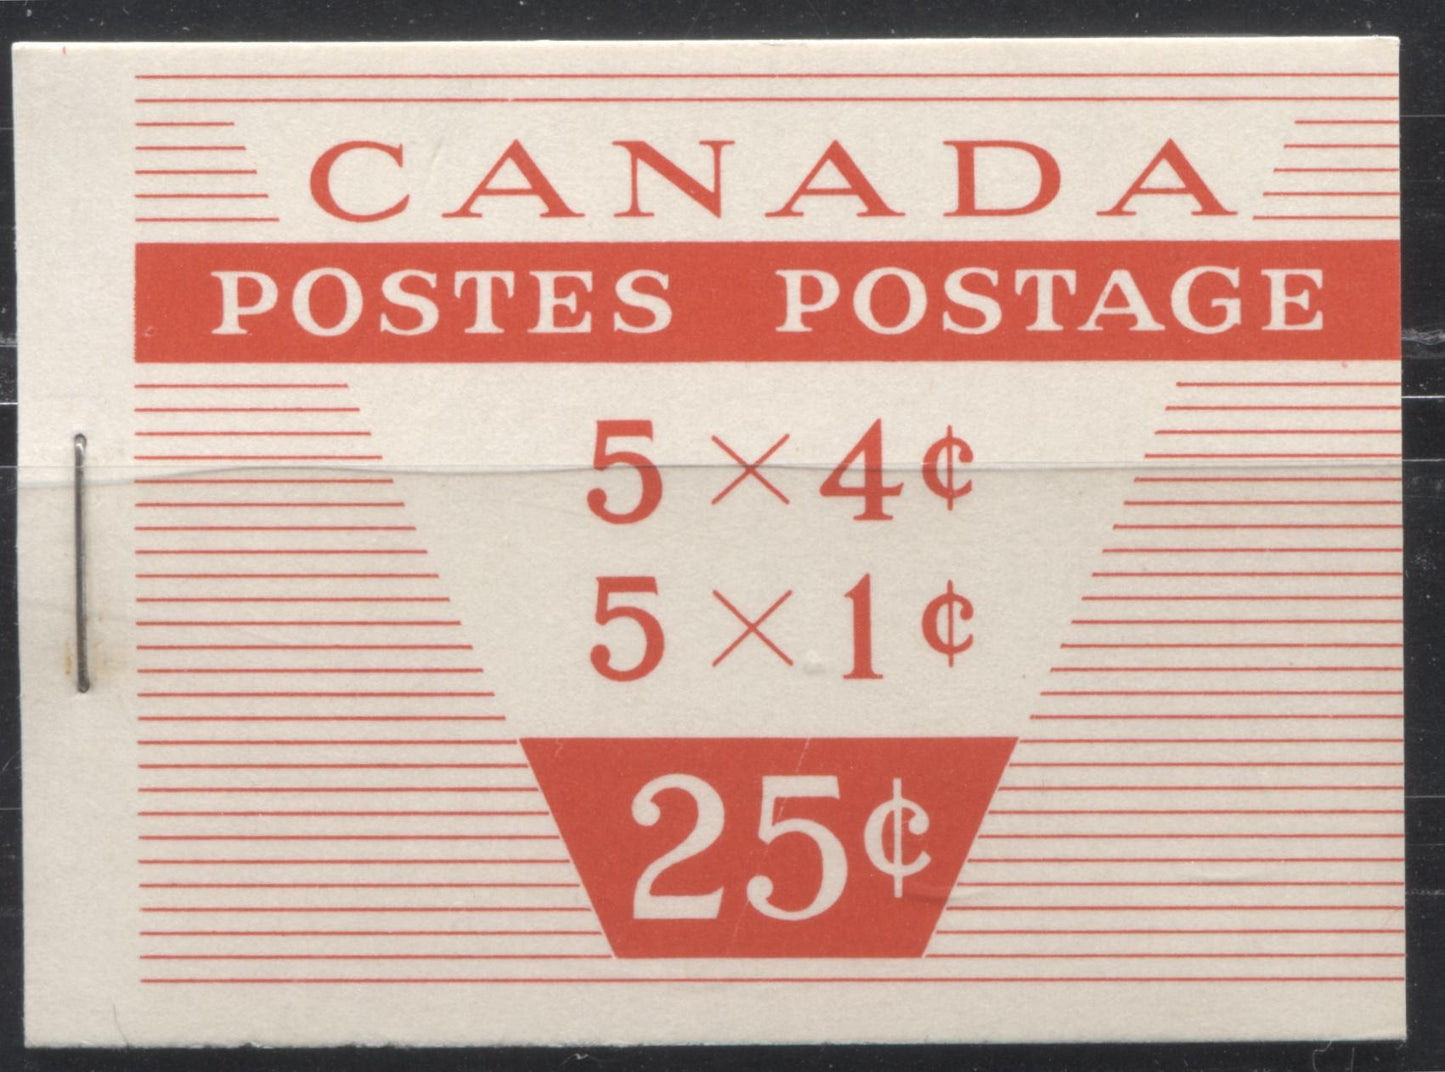 Canada McCann #BK53c (Unitrade #BK53c) 1962-1967 Cameo Issue, a VFNH Booklet Containing 1c & 4c Panes of 5 + Label, Type III Cover, DF Grayish Cream Front Cover With Fluorescent Red Ink, DF Panes, MF Interleaving